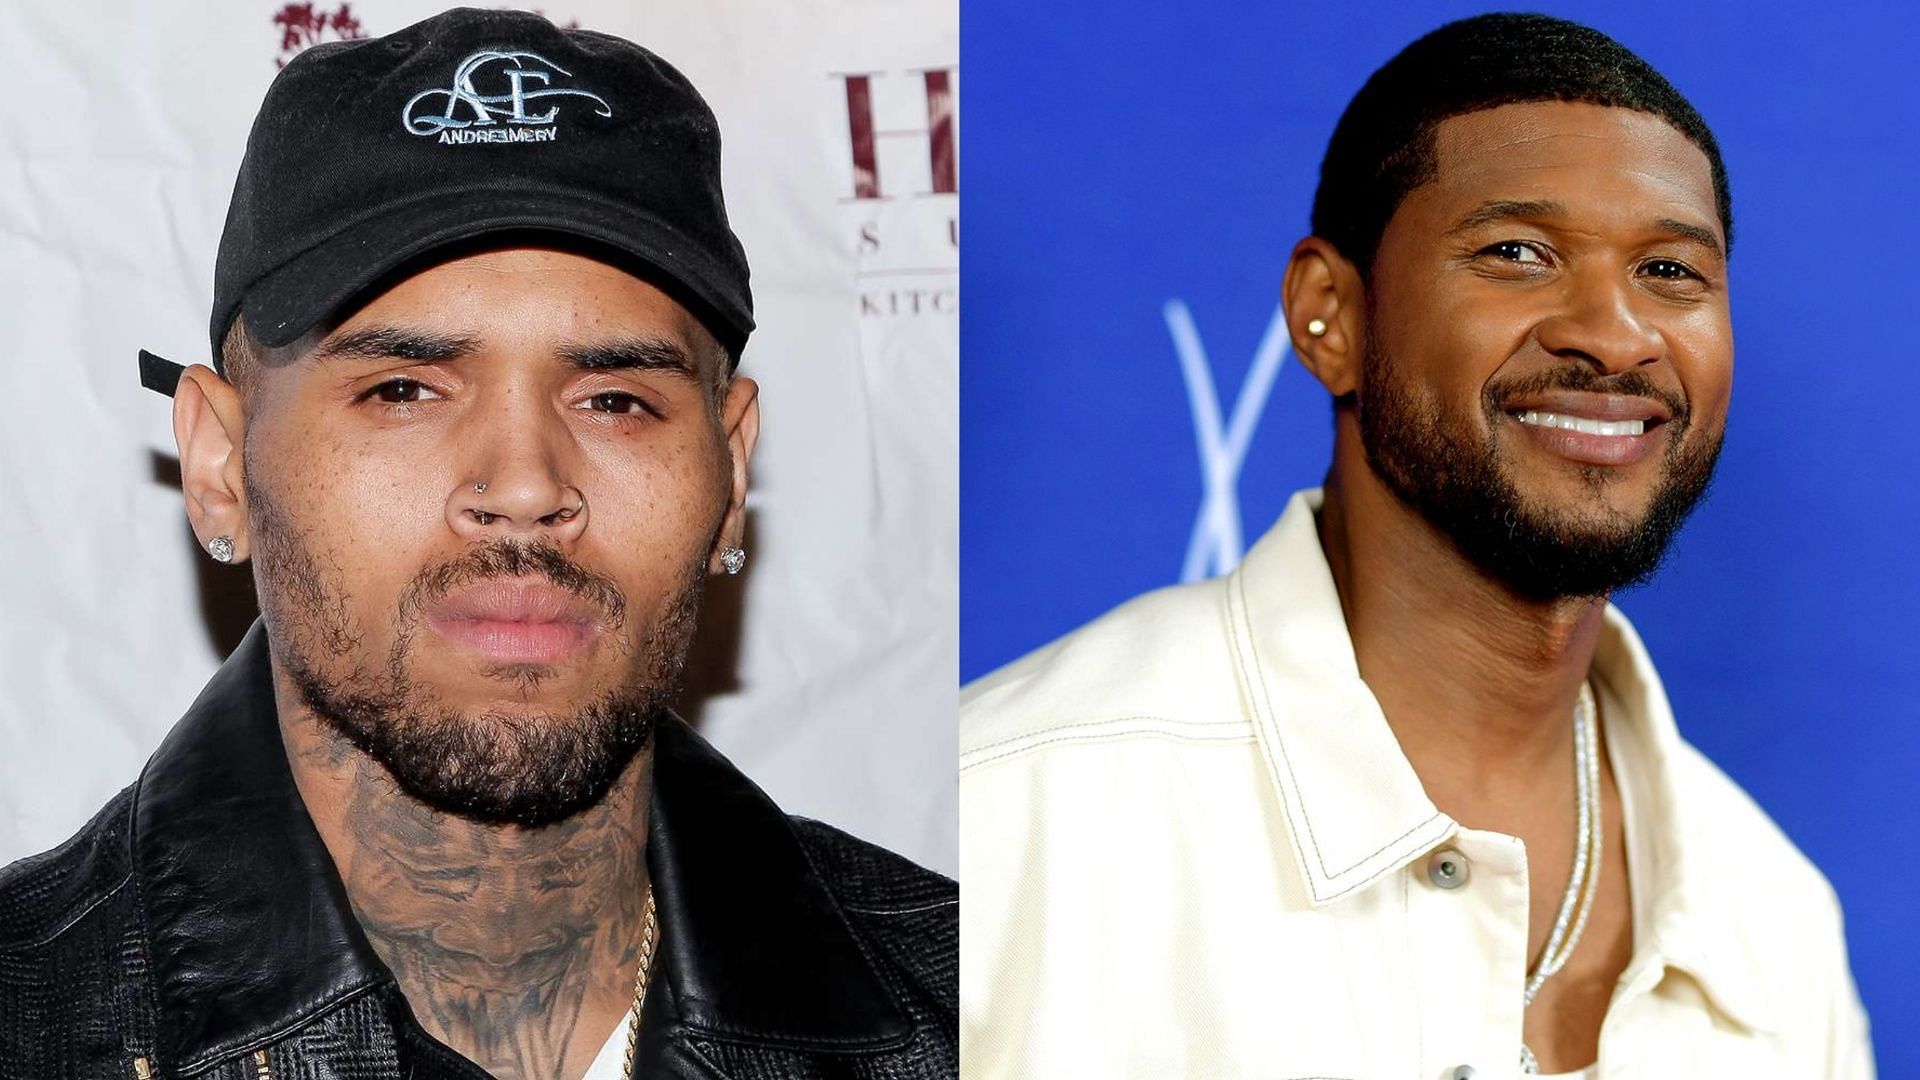 Chris Brown and Usher. (Photos via Getty Images)